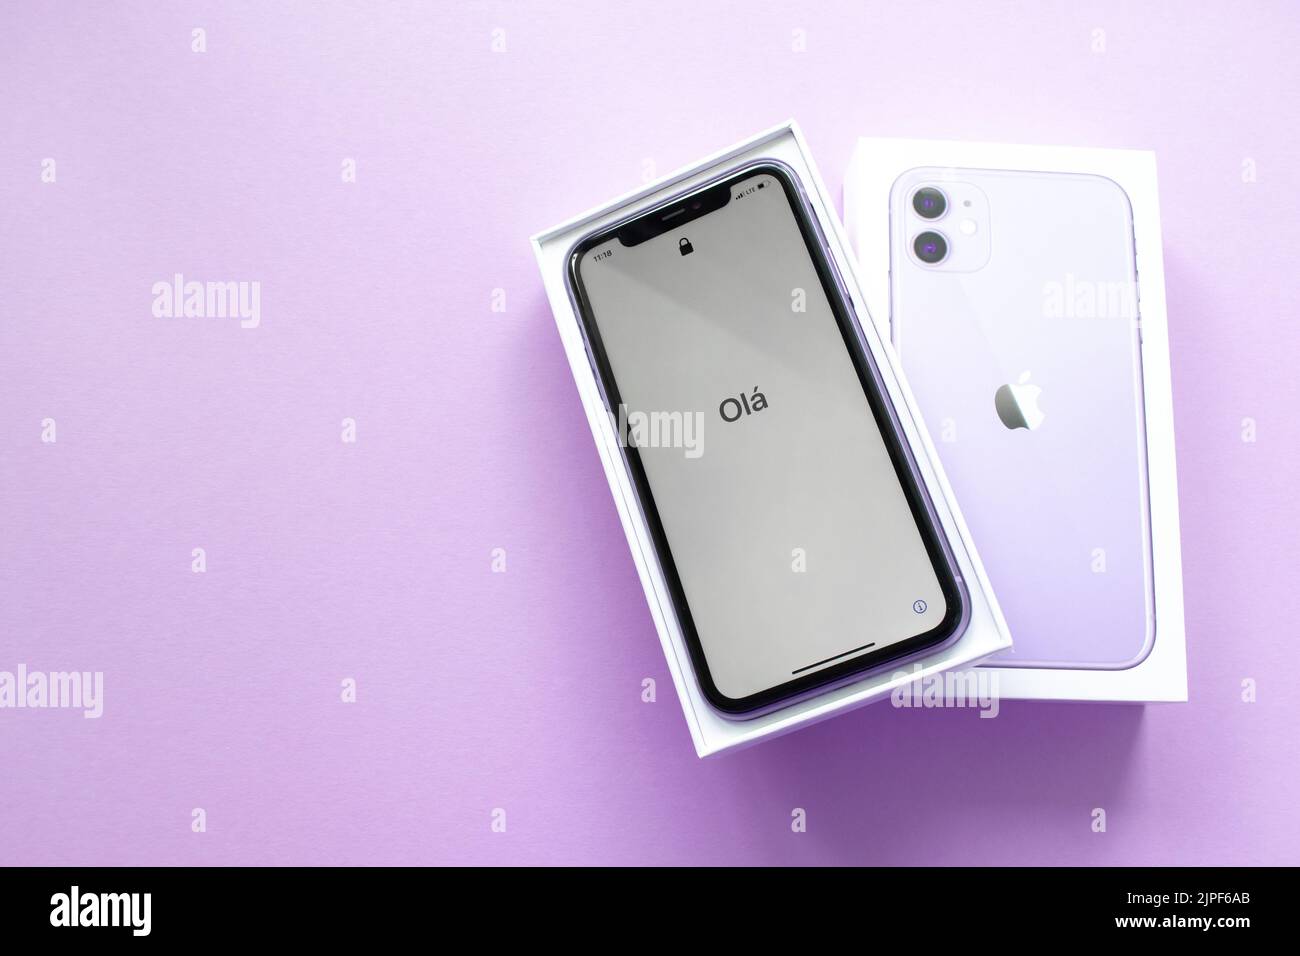 Moscow, Russia, May 2021: A new iPhone 12 model of violet color in an open branded box on a lilac background. On the iPhone screen, a welcome in in Po Stock Photo